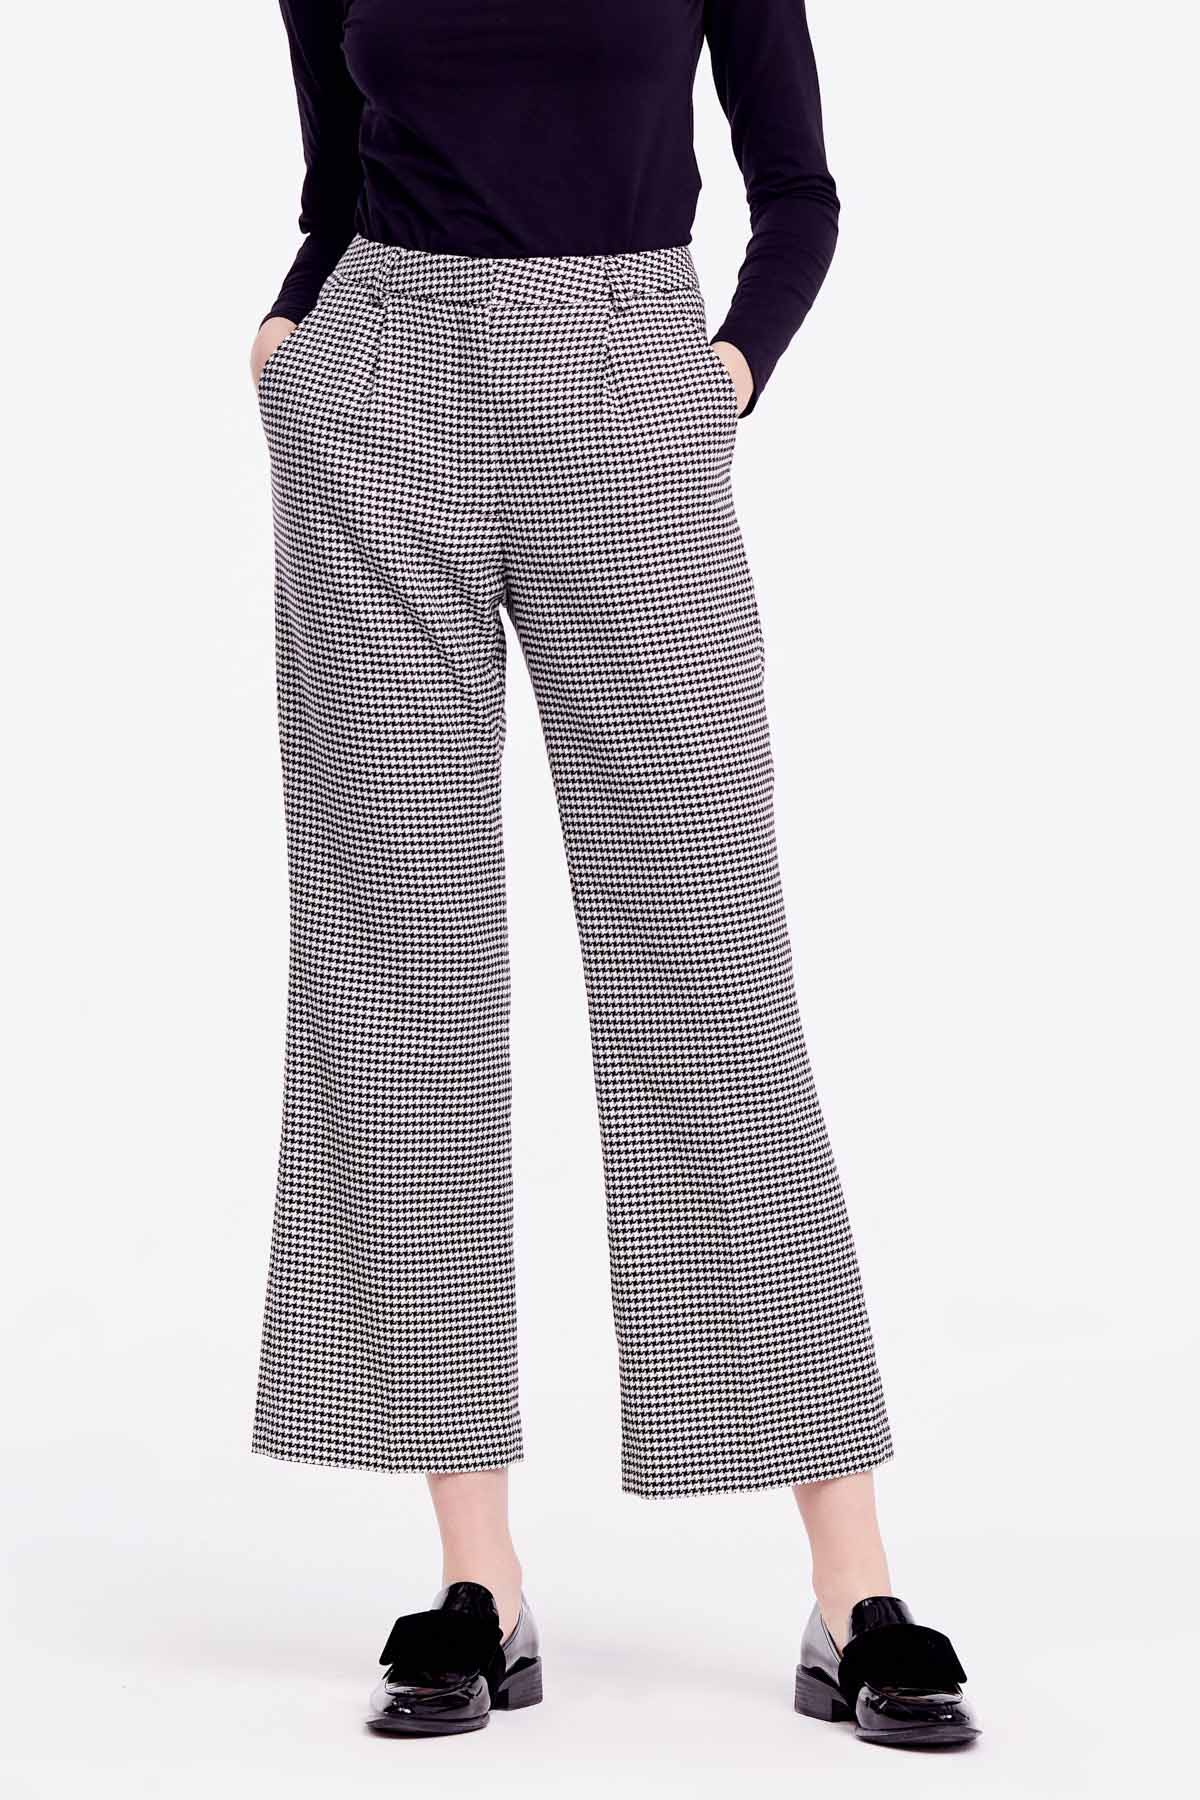 Cropped trousers with black-and-white houndstooth print, photo 1